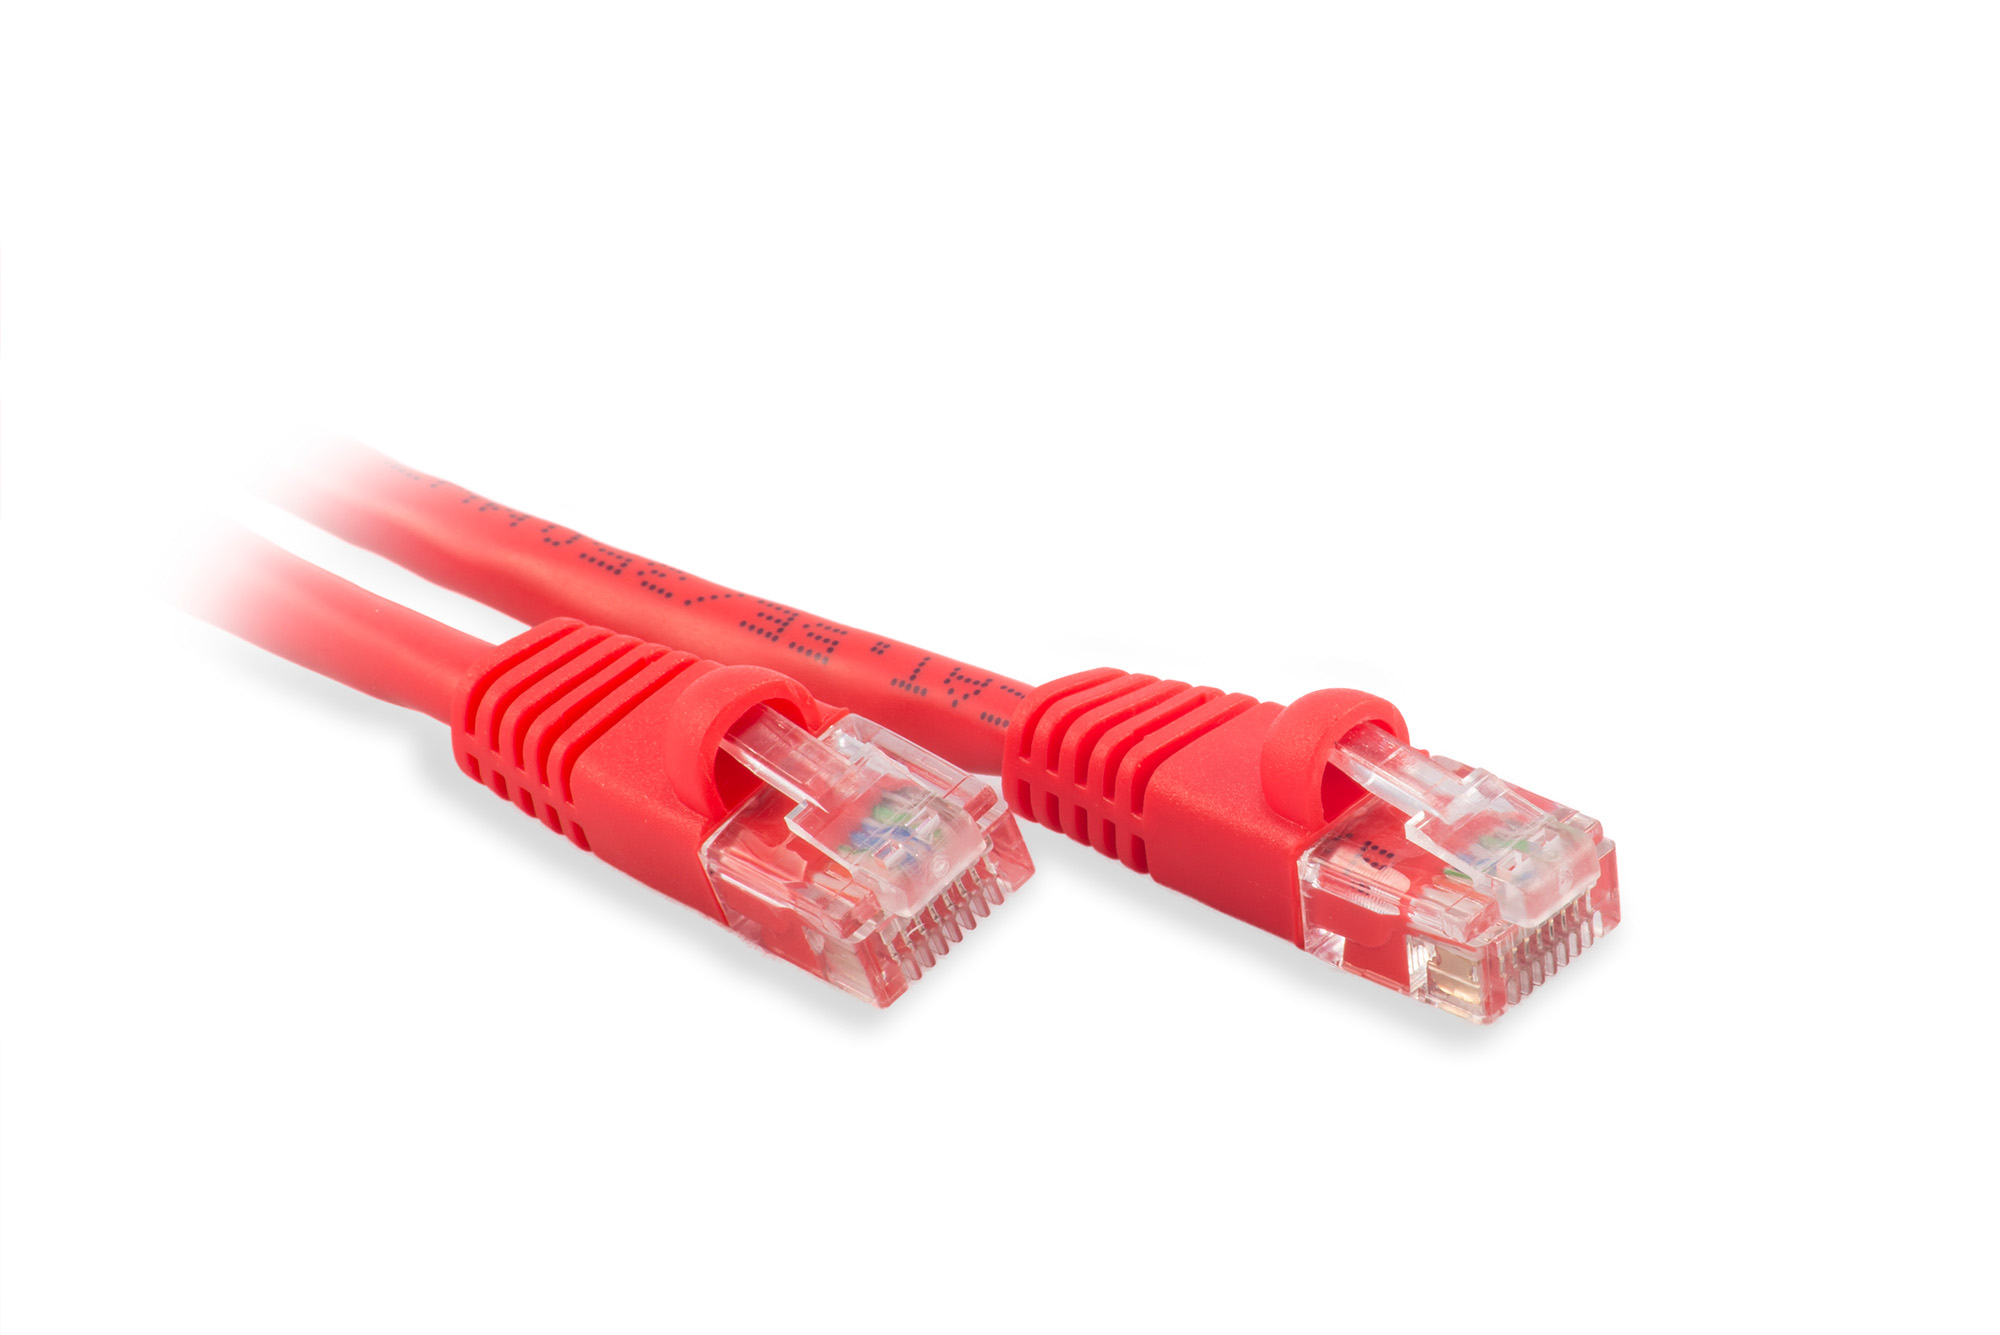 6FT Cat6 Ethernet Patch Cable - Red Color - Snagless Boot